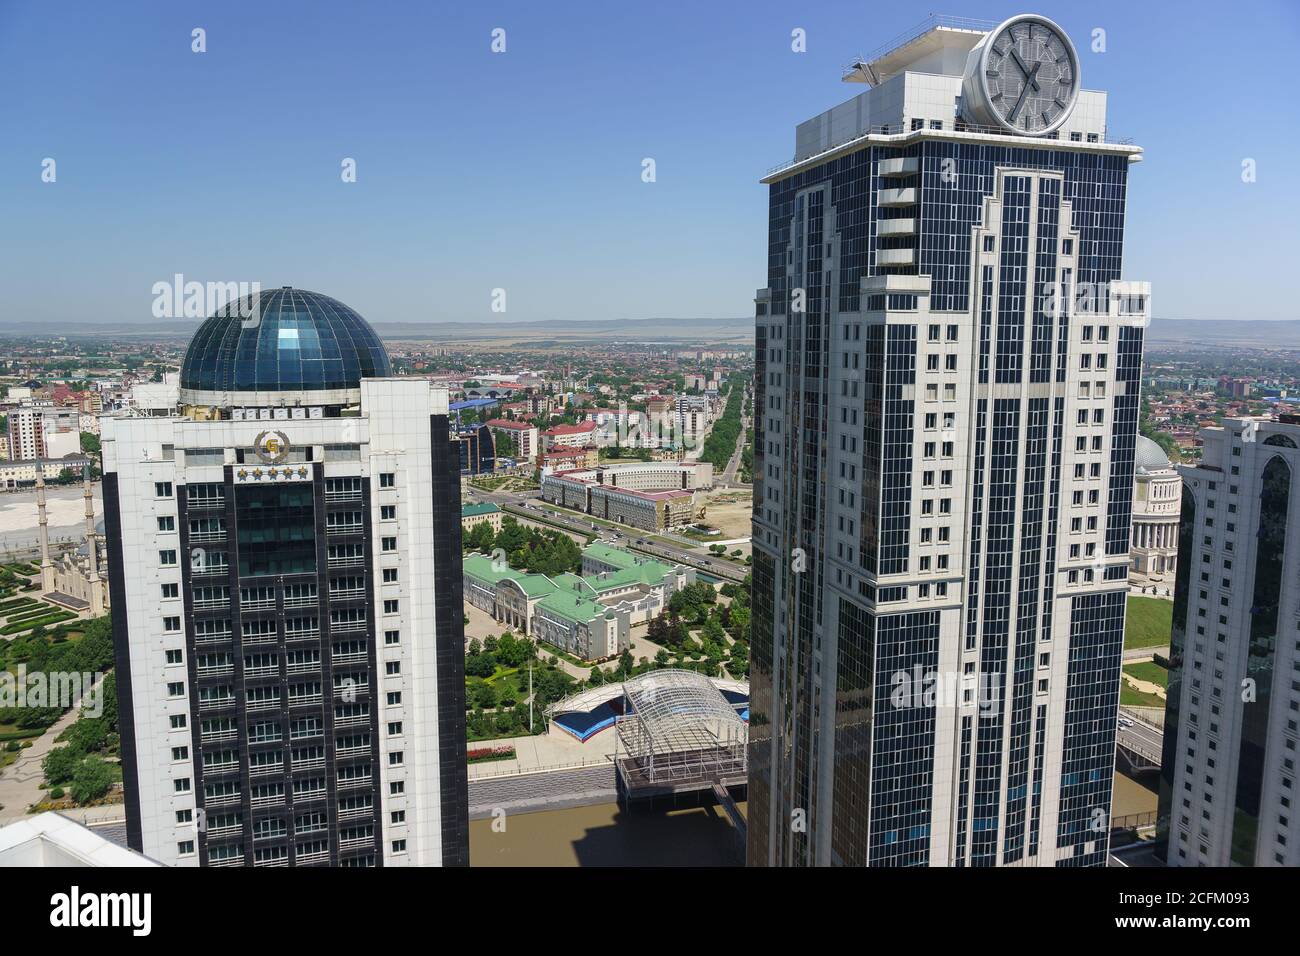 Grozny, Chechen Republic, Russia - June 02, 2019: Olympus Tower with the largest clock in the world and Grozny city hotel in the city center Stock Photo